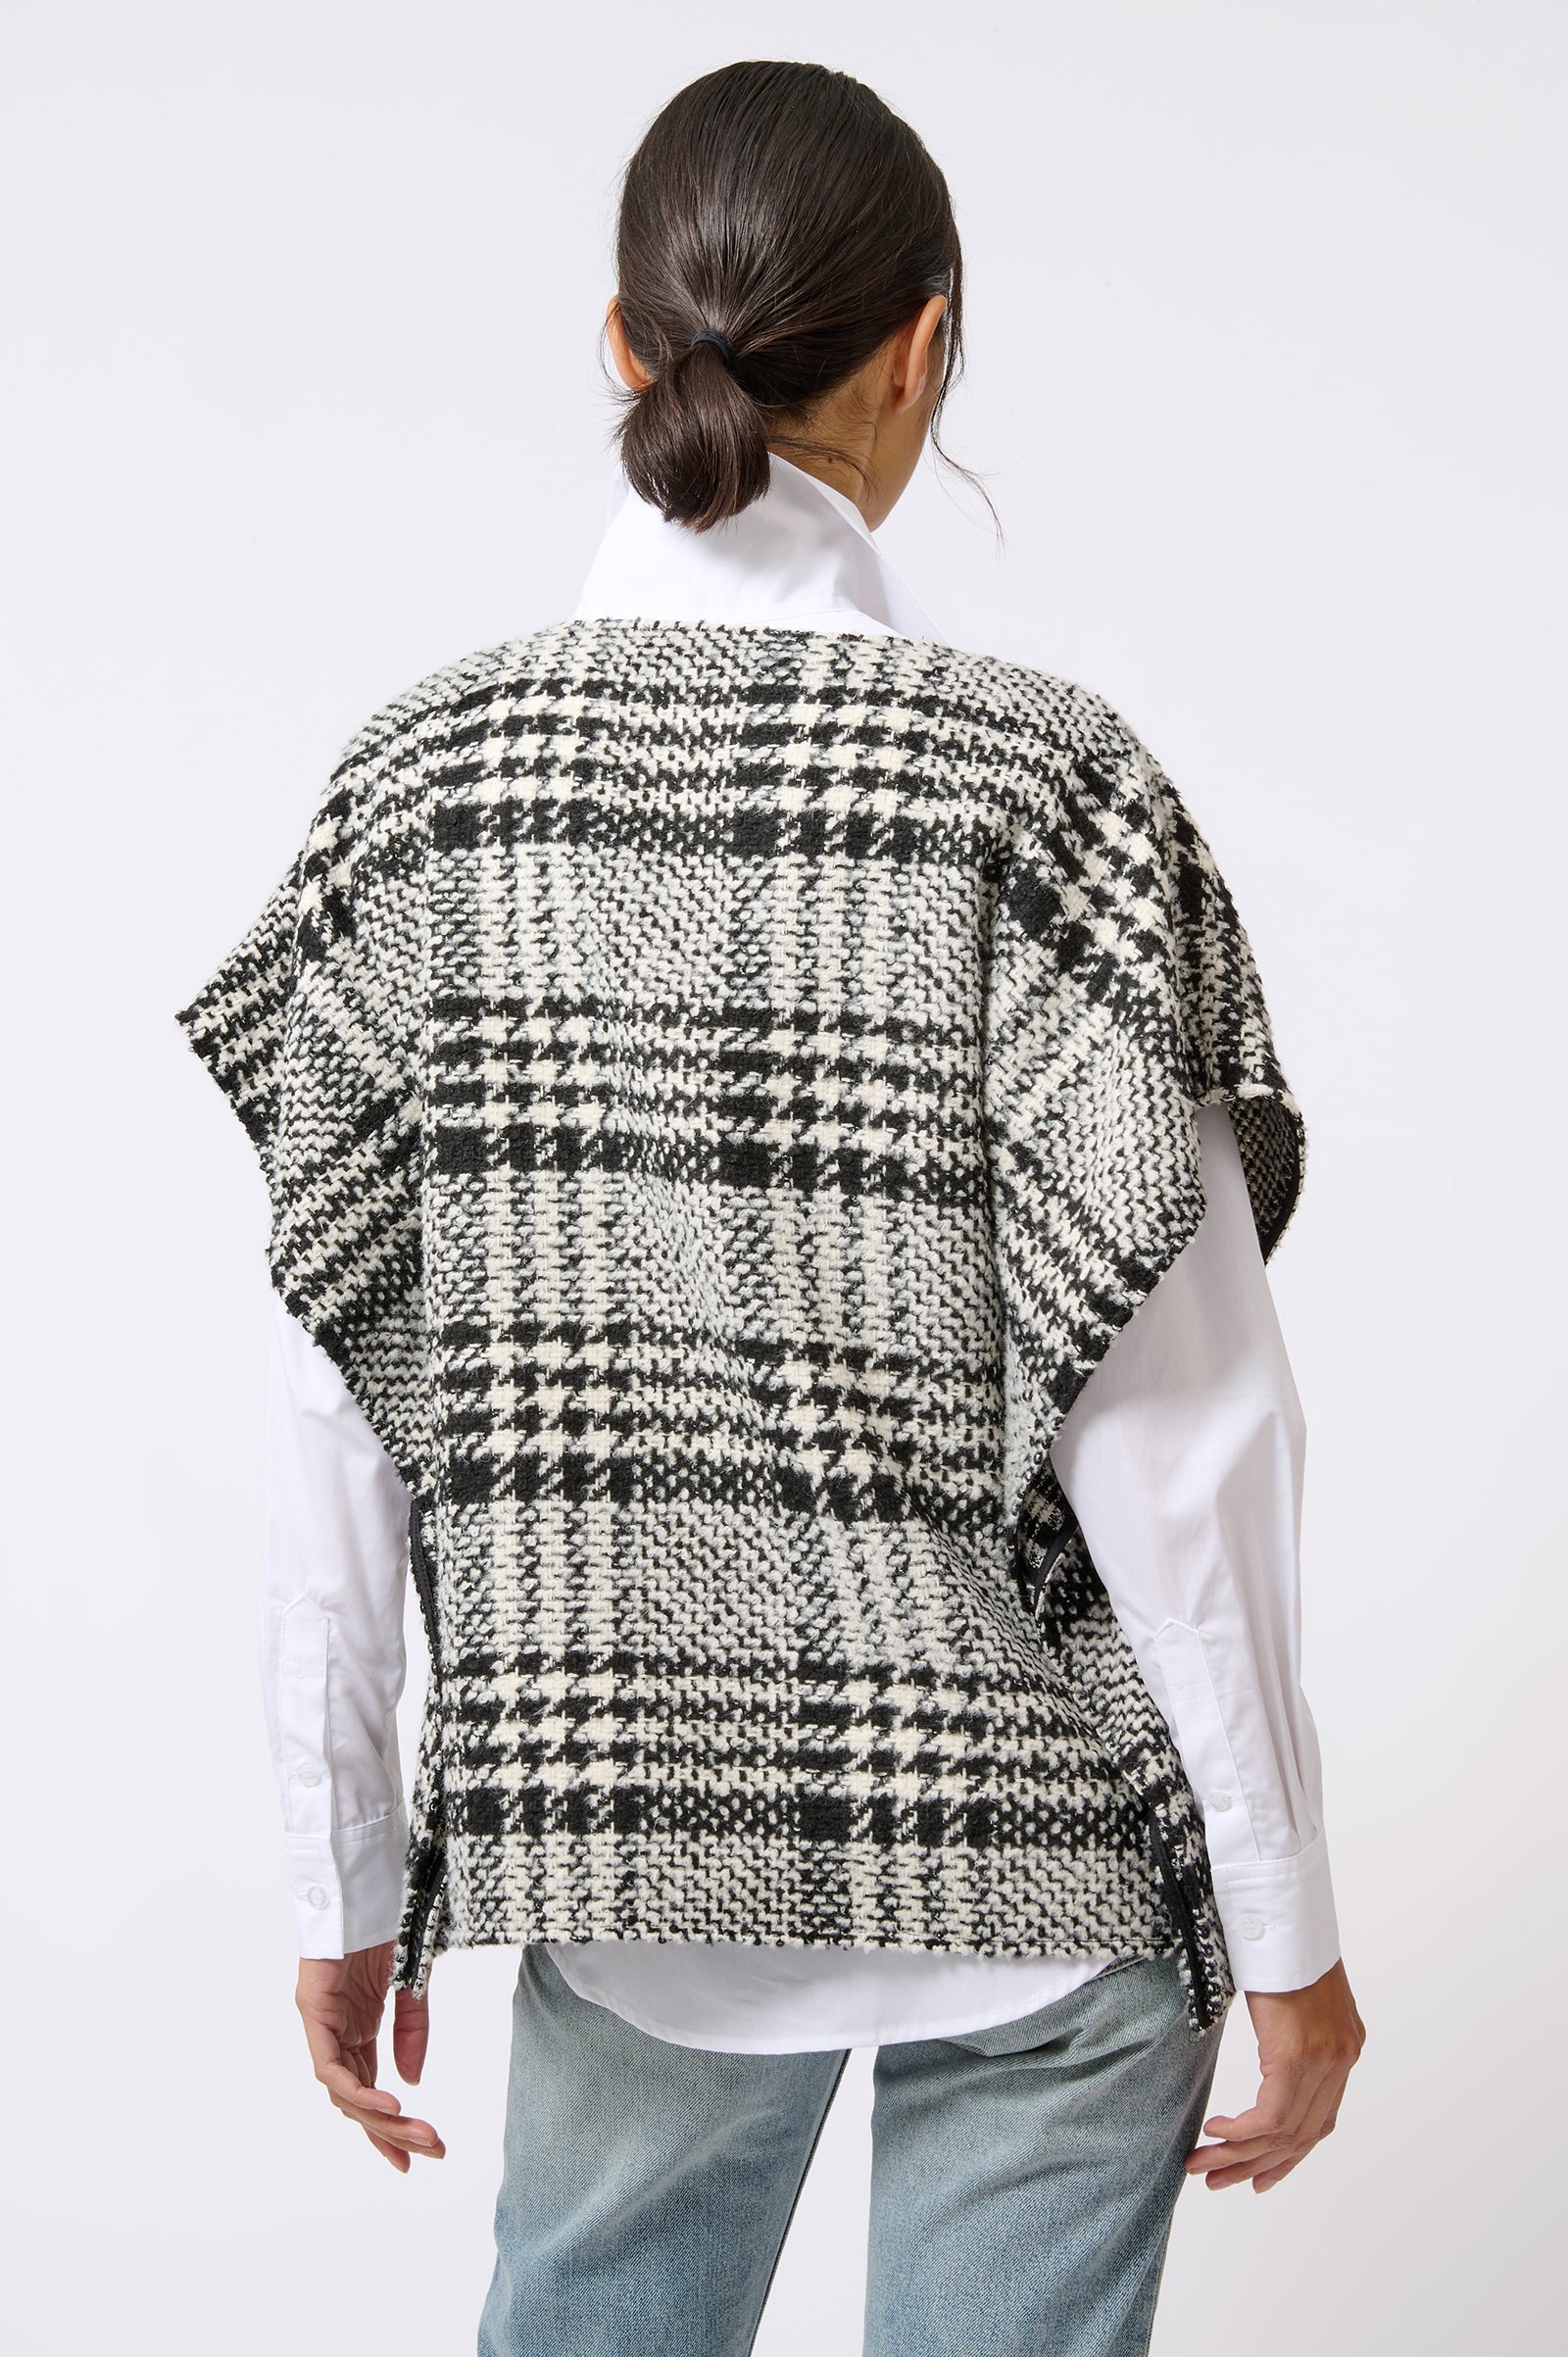 Kal Rieman Plaid Poncho in Black and White Plaid on Model with Hands in Front Front View